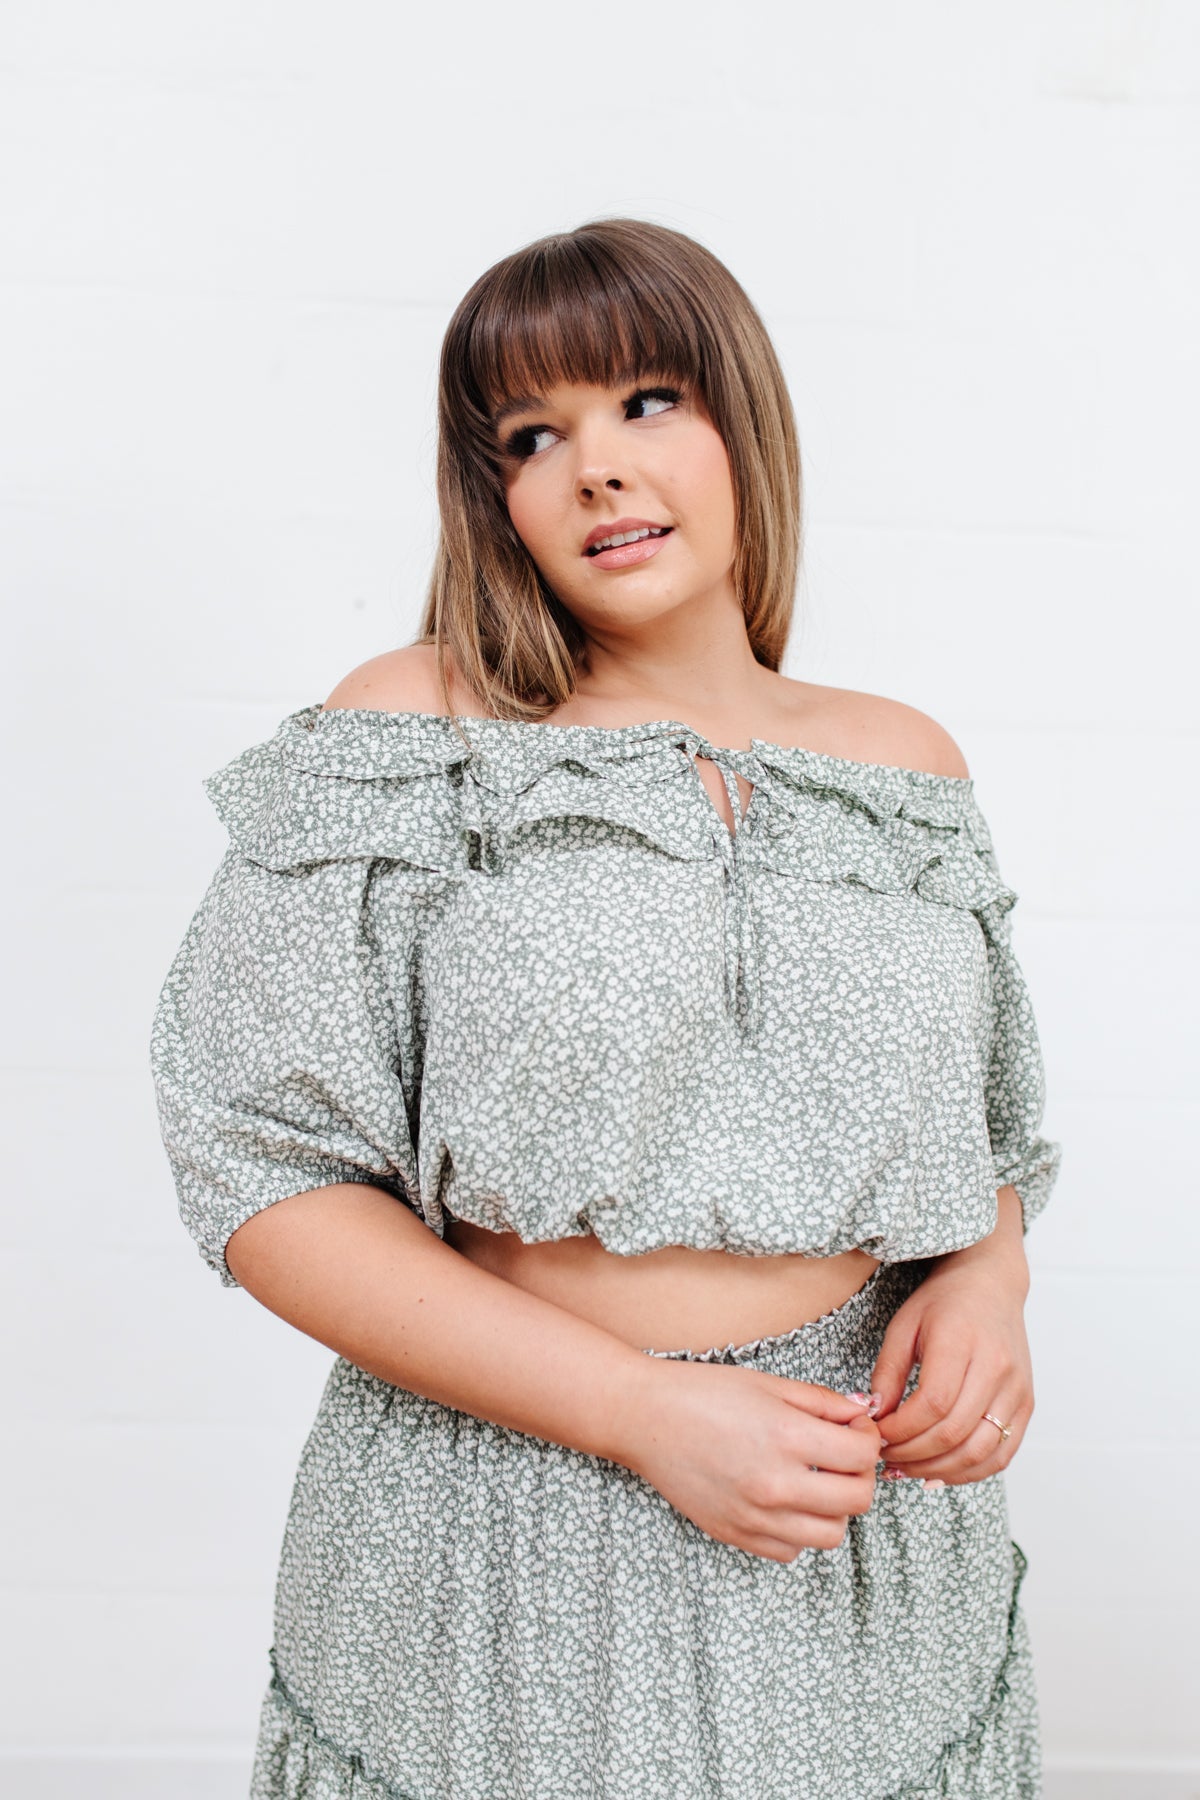 Head to date night in style in the Golden Hour Top! This cute top has all the details that we absolutely love. Featuring a ruffled elasticated neckline, keyhole detail on the front, balloon sleeves with elastic cuffs, and elastic waist. Not to mention it's in the most adorable tiny floral print! Pair with denim, nude sandals, and matching bag for an on trend look! S - 3X